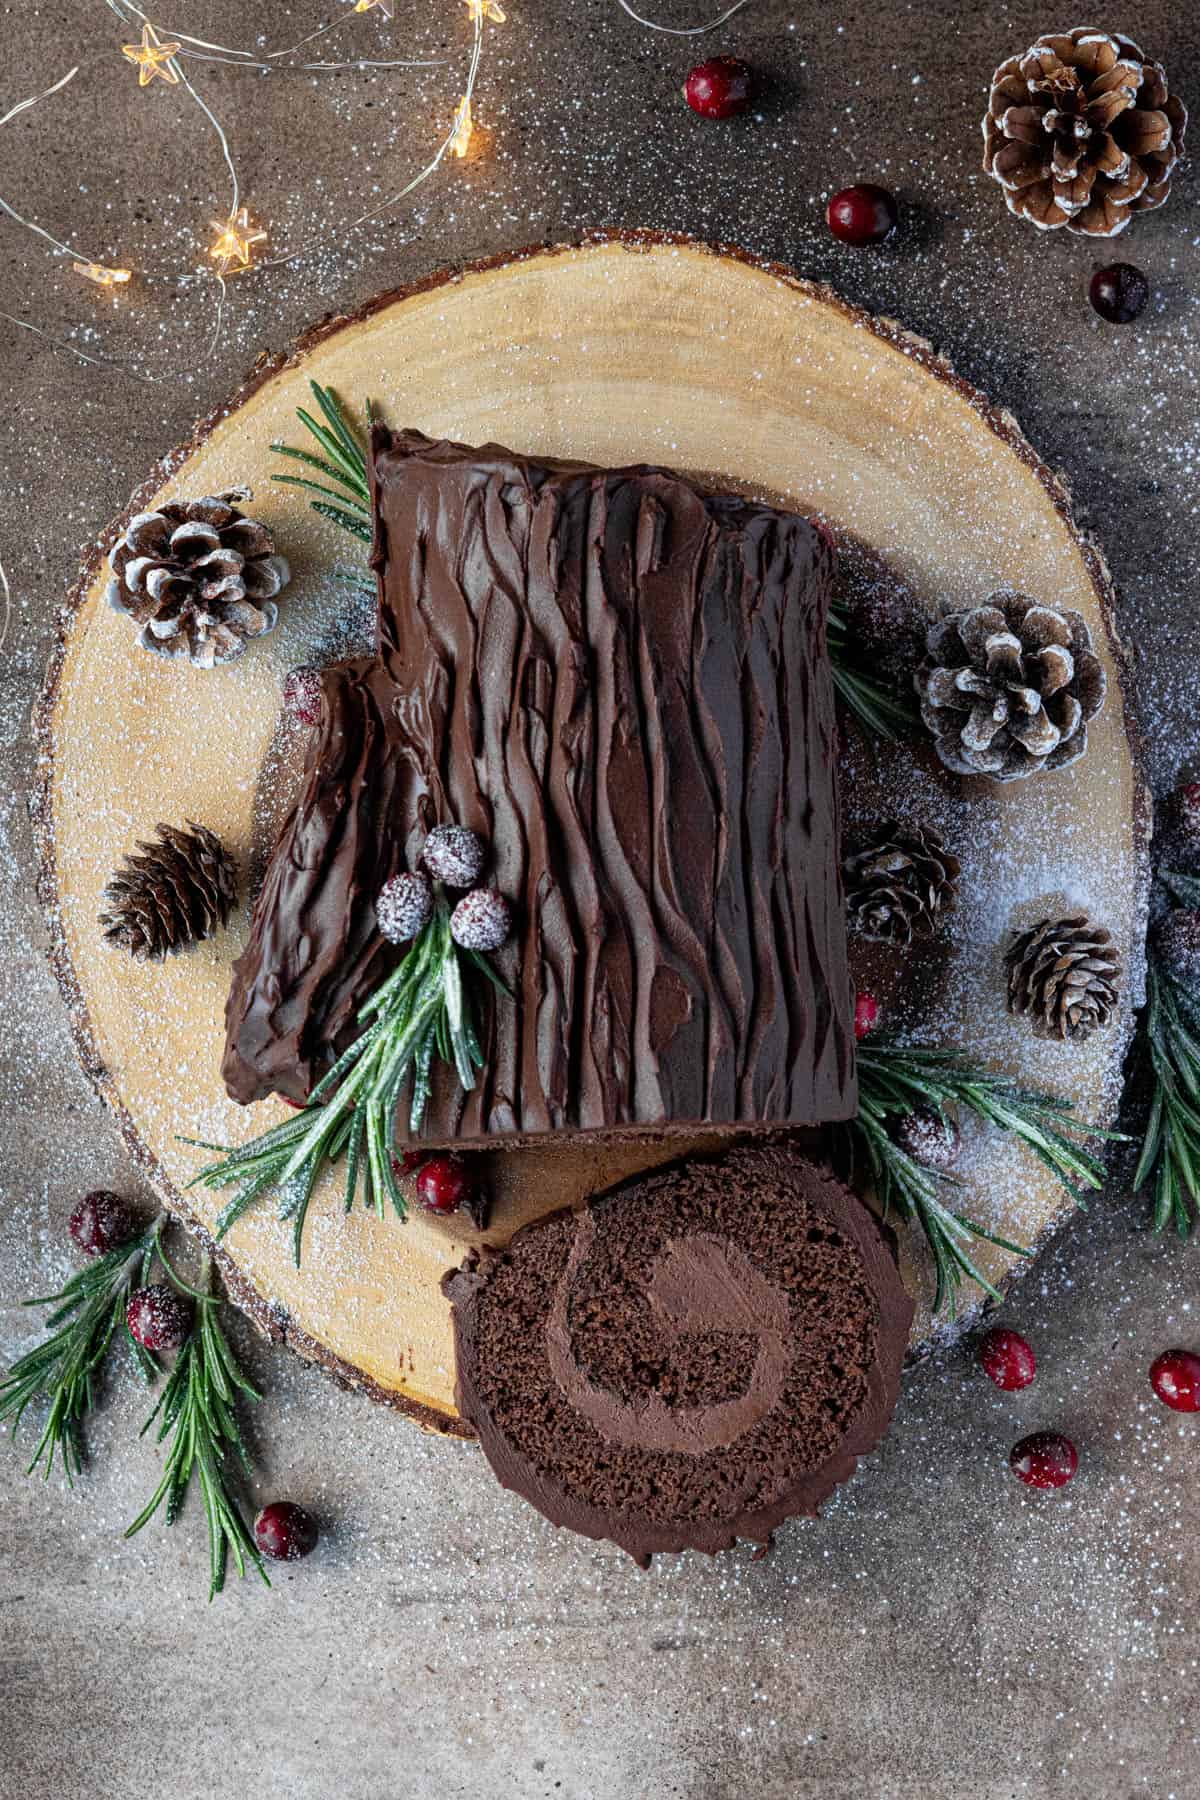 Top down shot of the sliced vegan yule log on a wooden board with pine cones and Christmas lights.